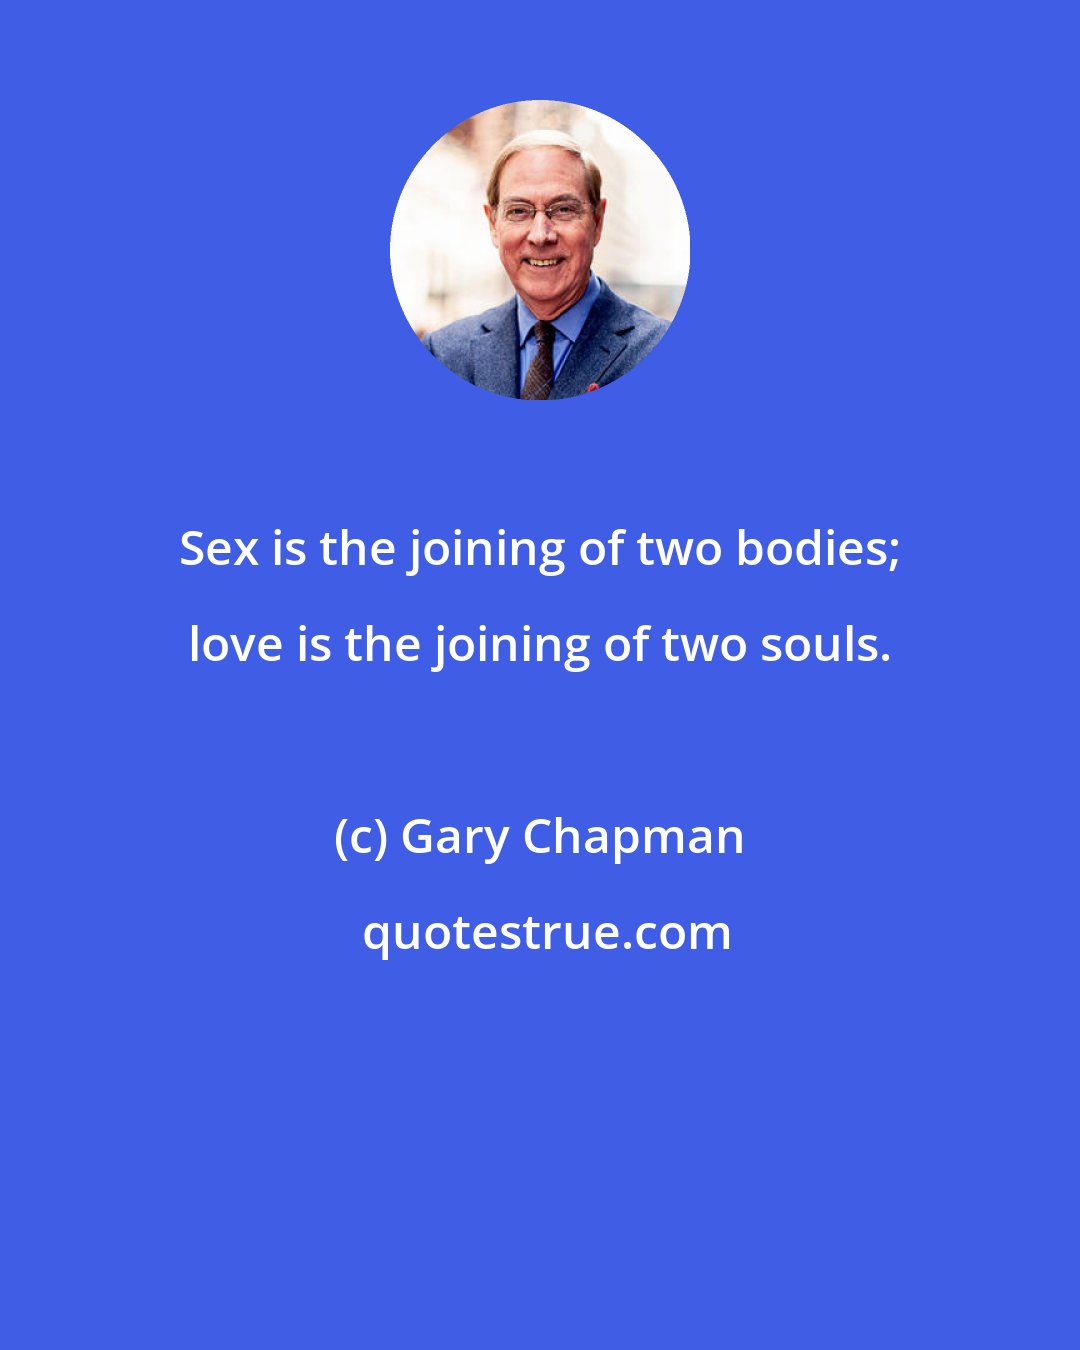 Gary Chapman: Sex is the joining of two bodies; love is the joining of two souls.